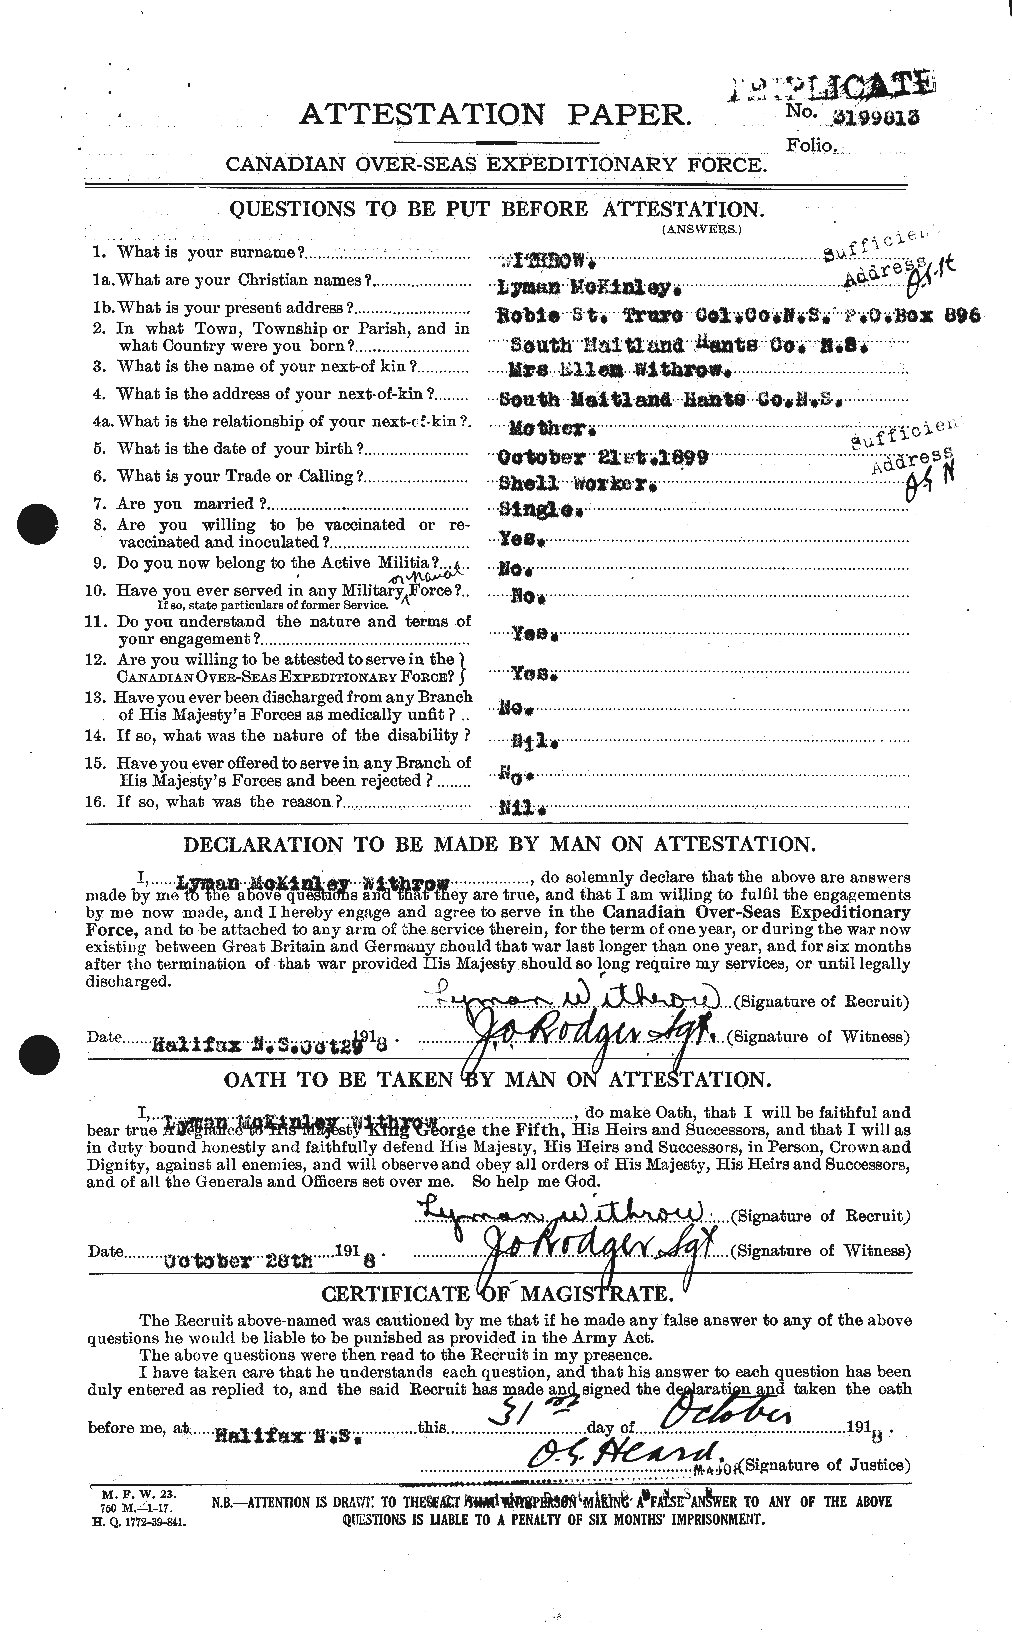 Personnel Records of the First World War - CEF 680025a